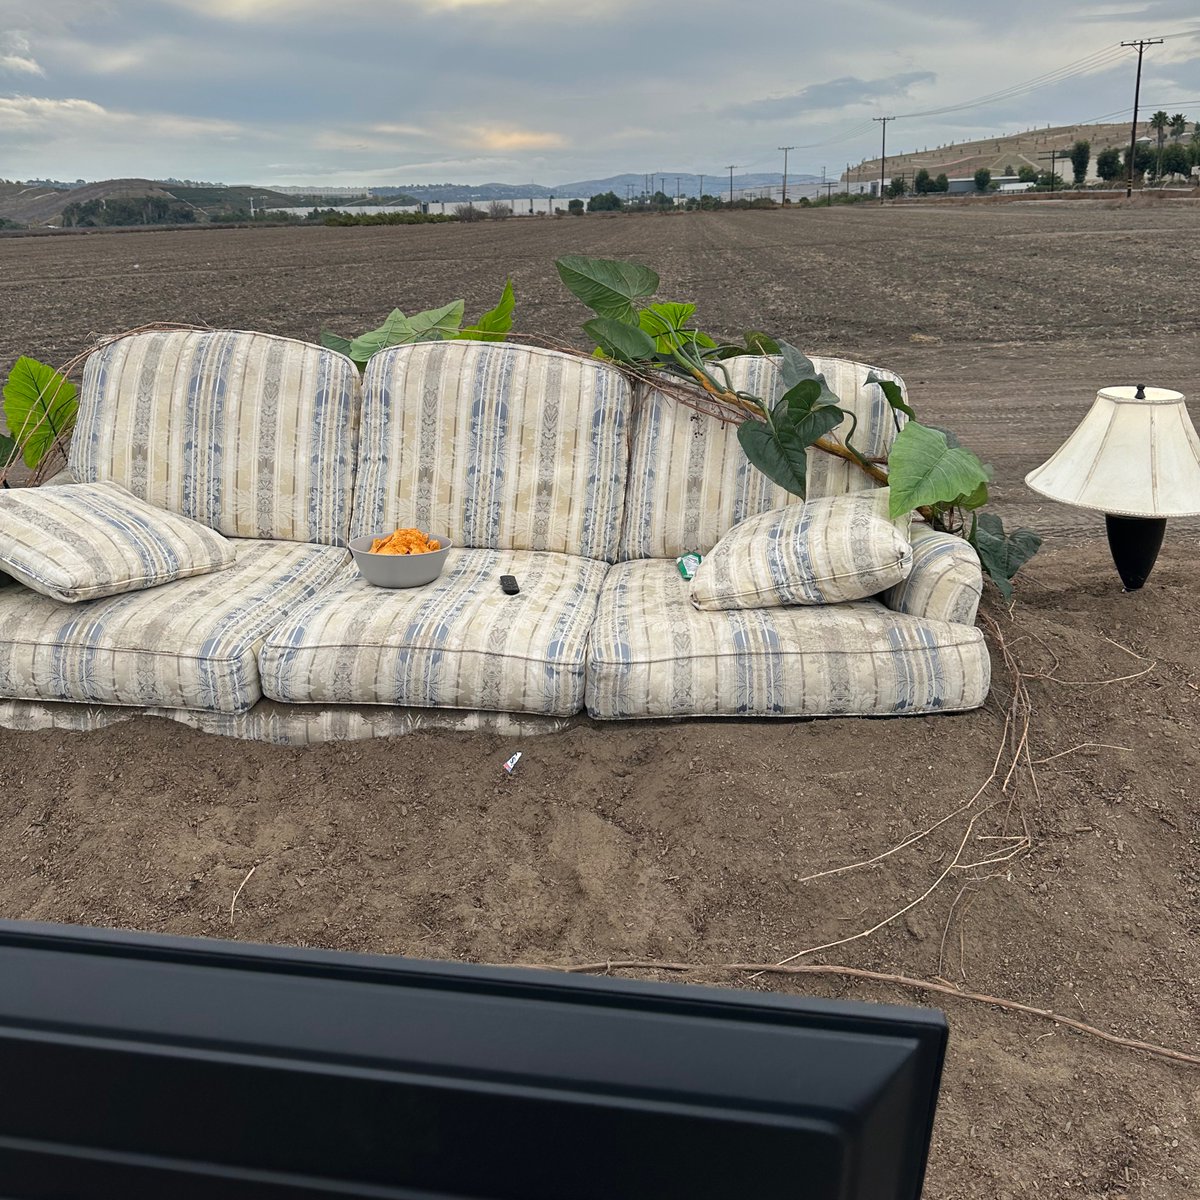 You're on Pluto TV's Couch Potato Farm and a seat just opened. What channel are you binging first?! 🛋️🥔